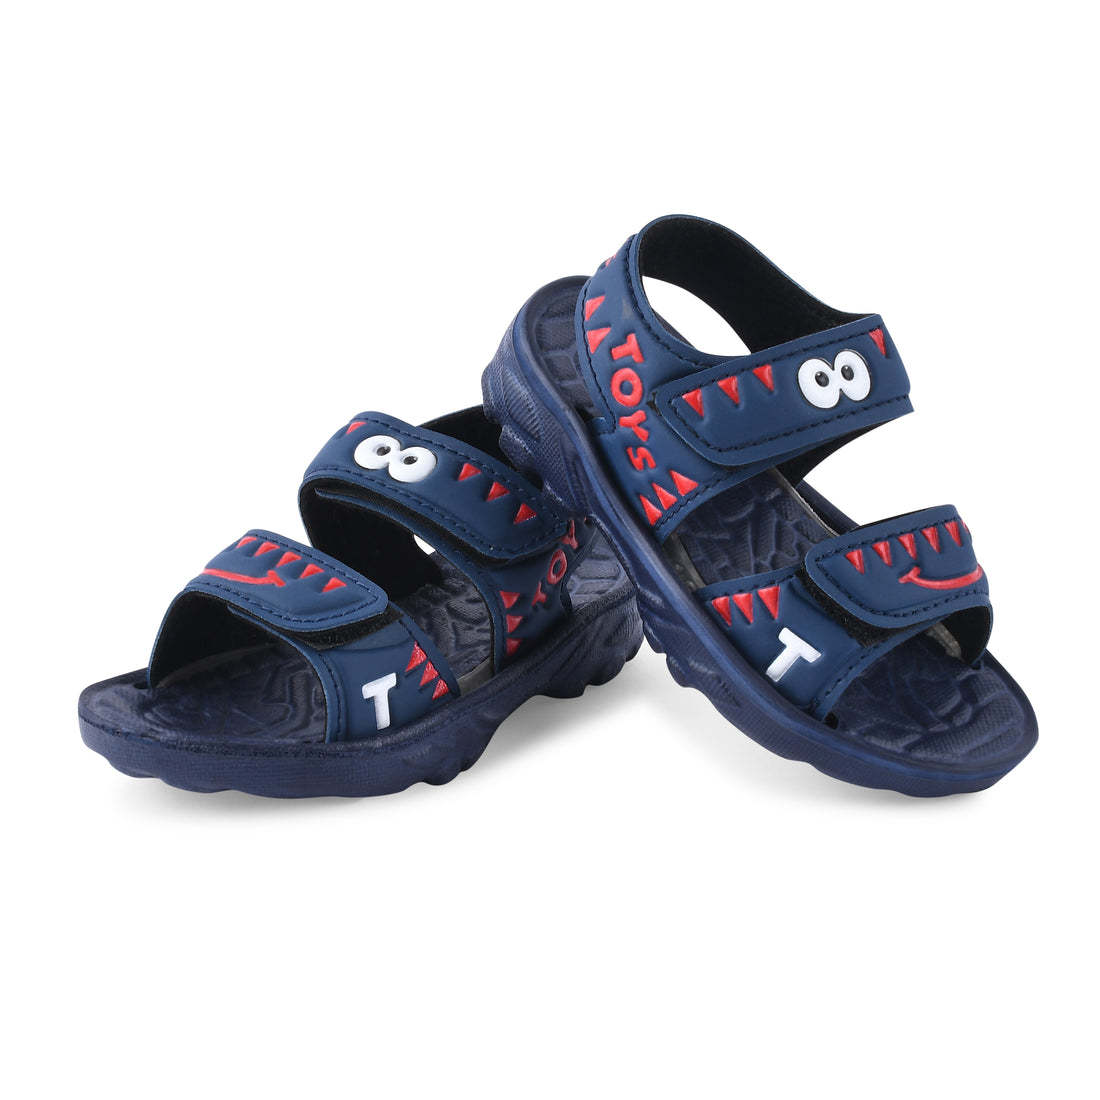 Kats TOYS Kids Baby Boys and Baby Girls Sandals